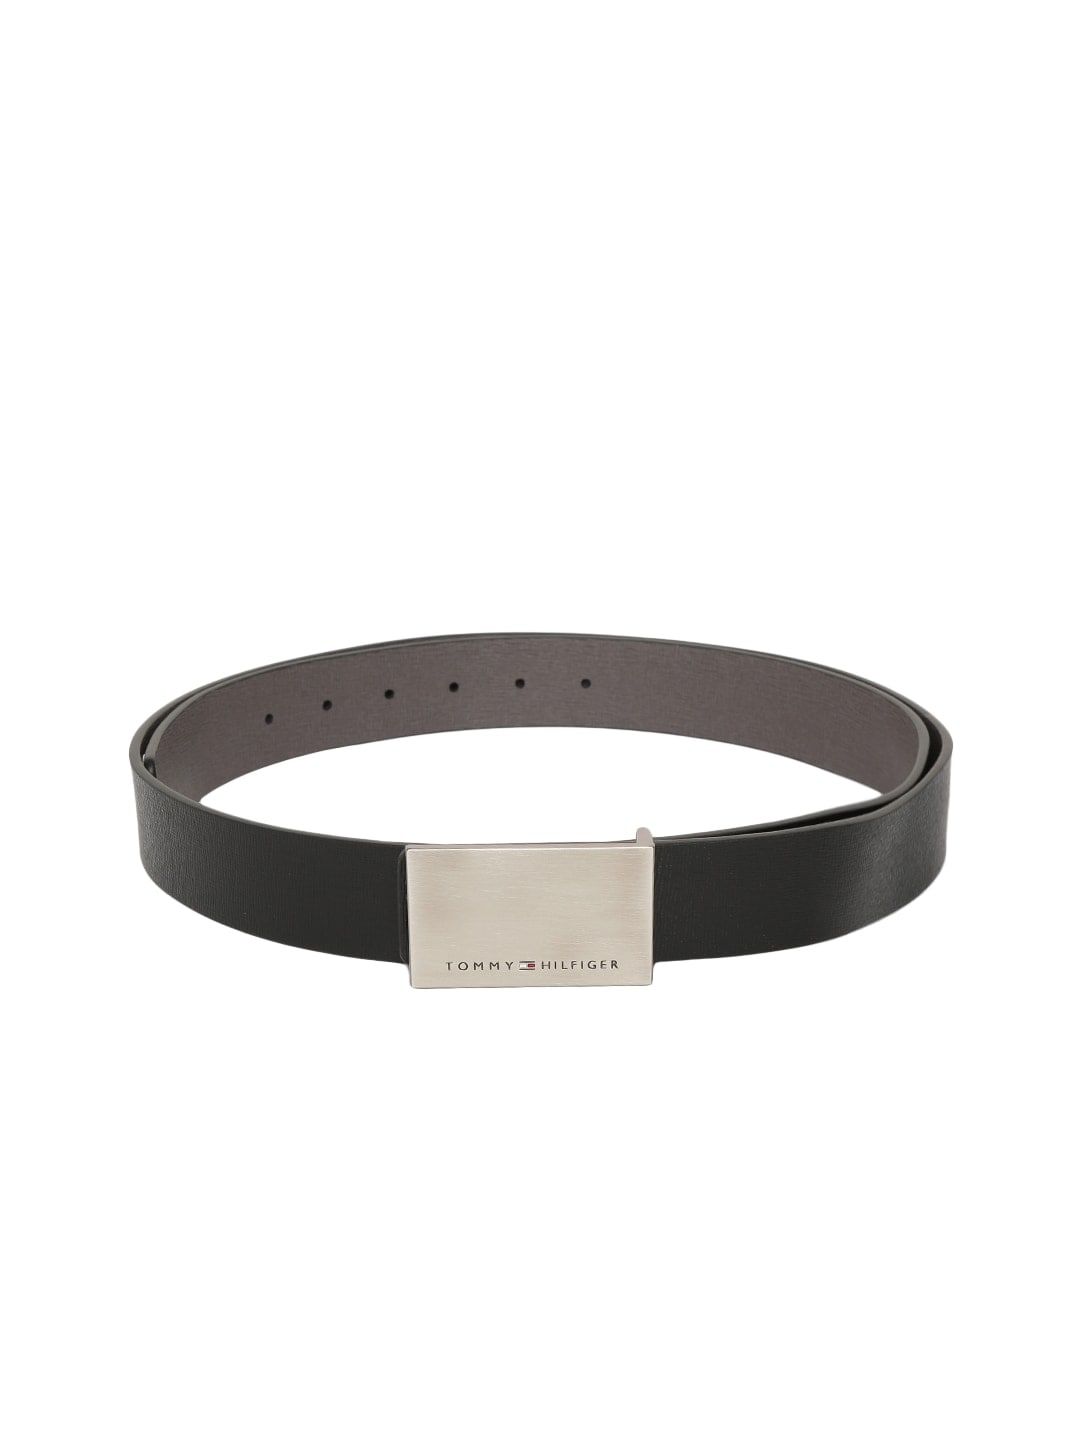 Tommy Hilfiger Unisex Black & Grey Textured Reversible Leather Belt Price in India